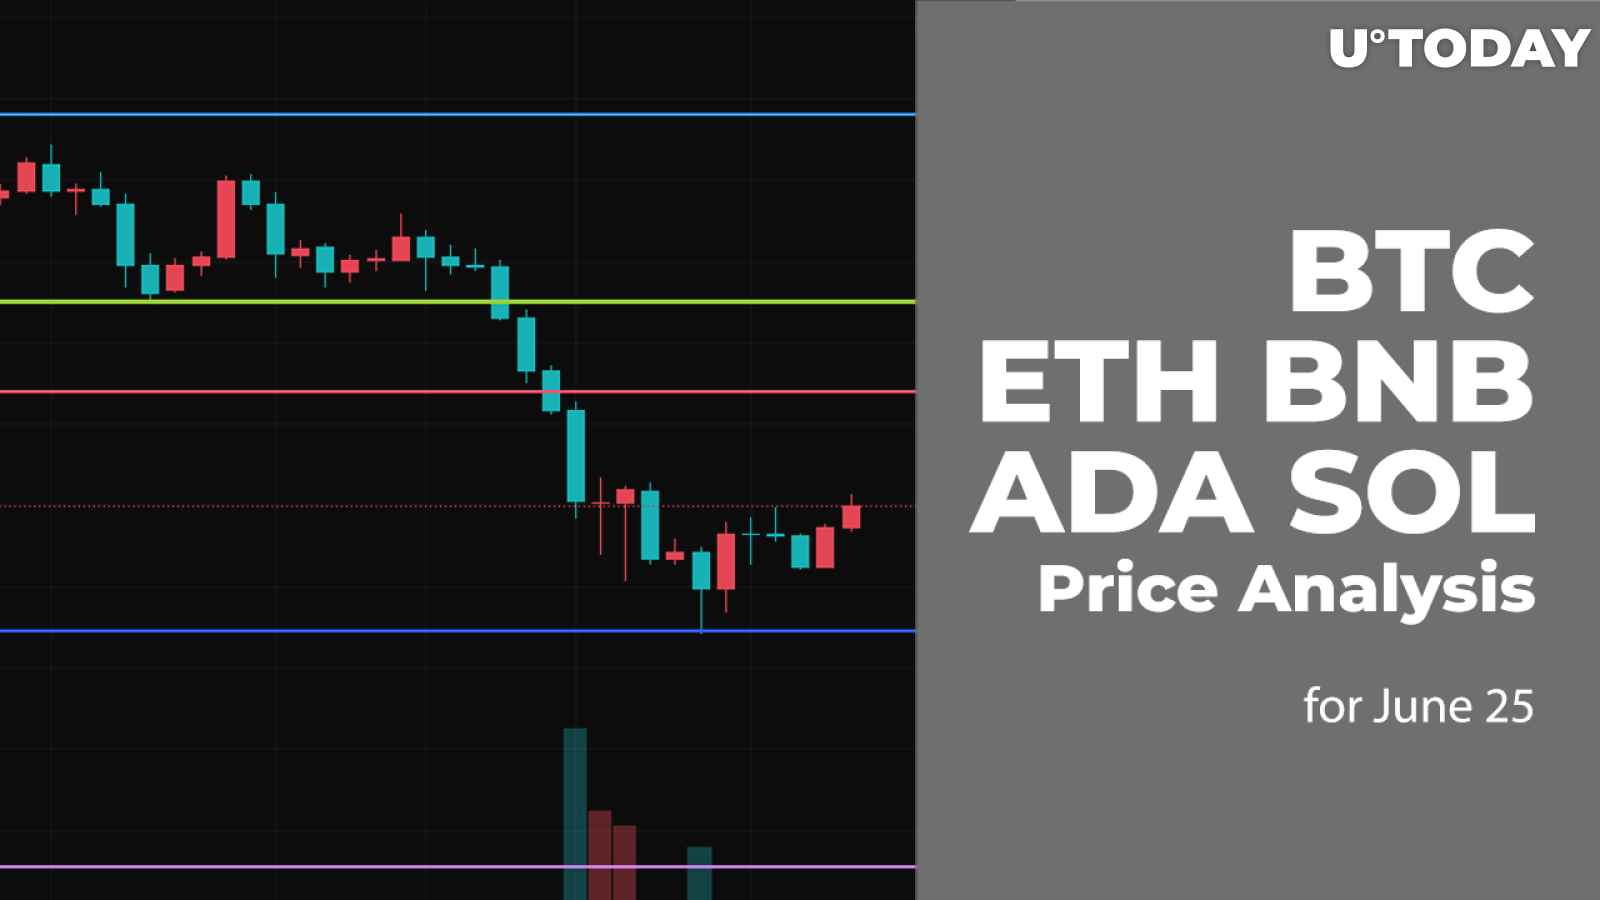 BTC, ETH, BNB, ADA and SOL Price Analysis for June 25